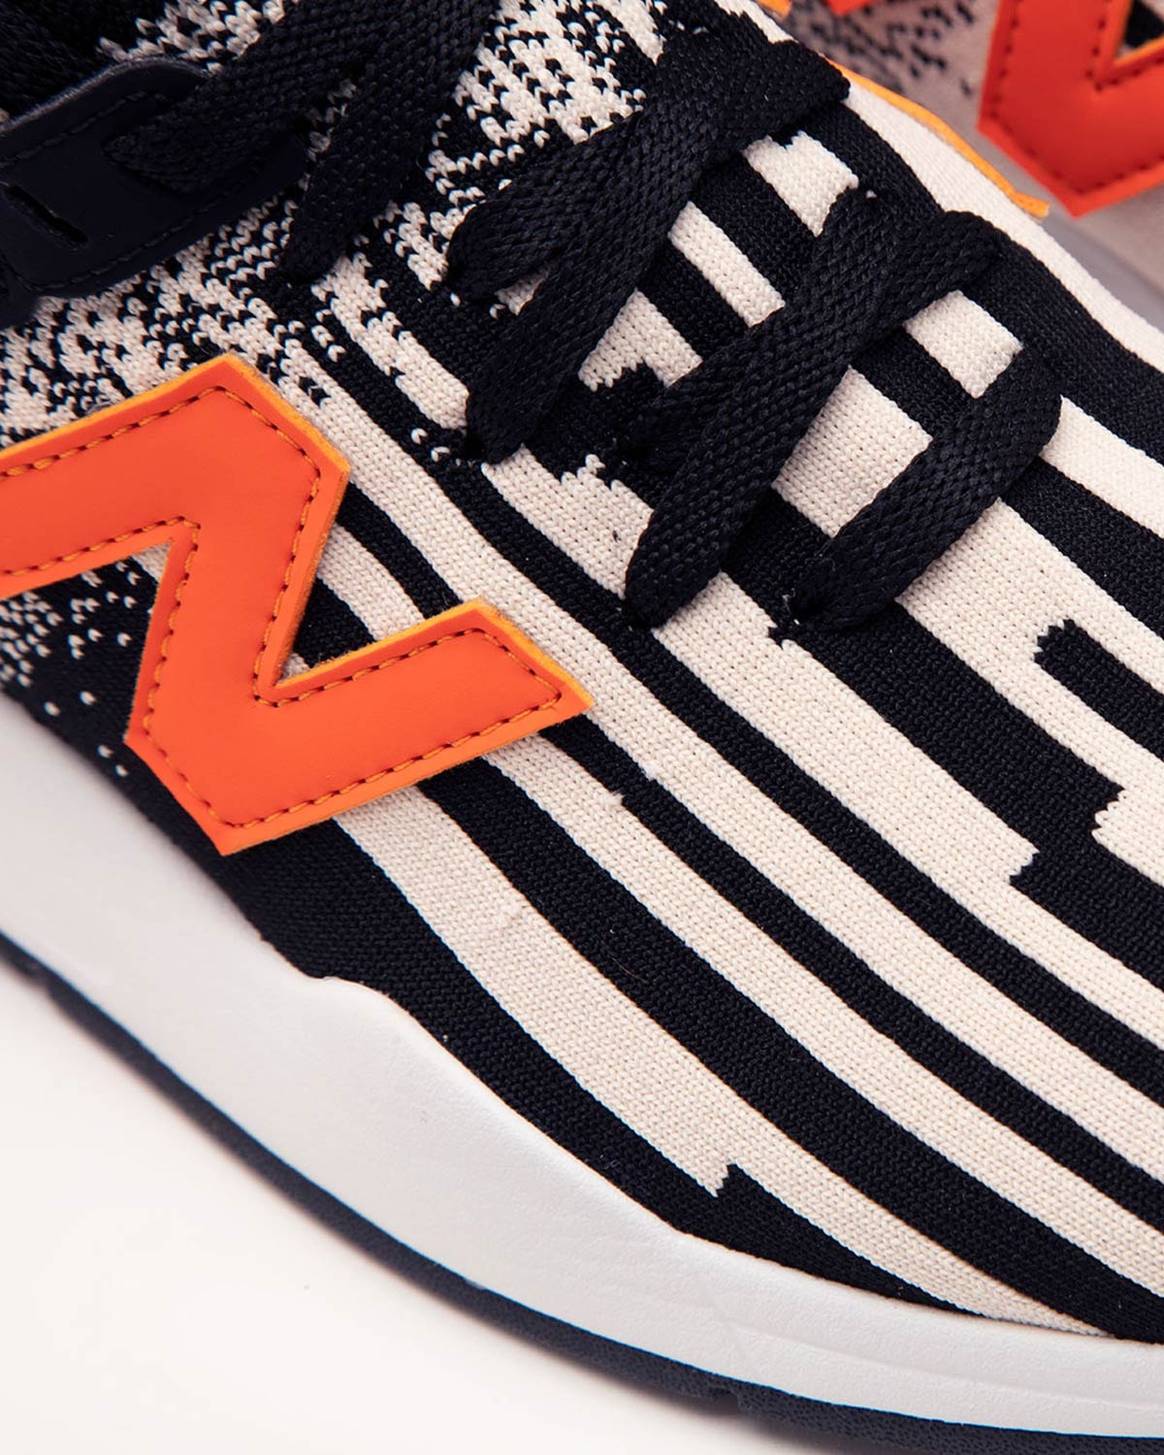 New Balance teams up with Unmade for customisable knitted shoe